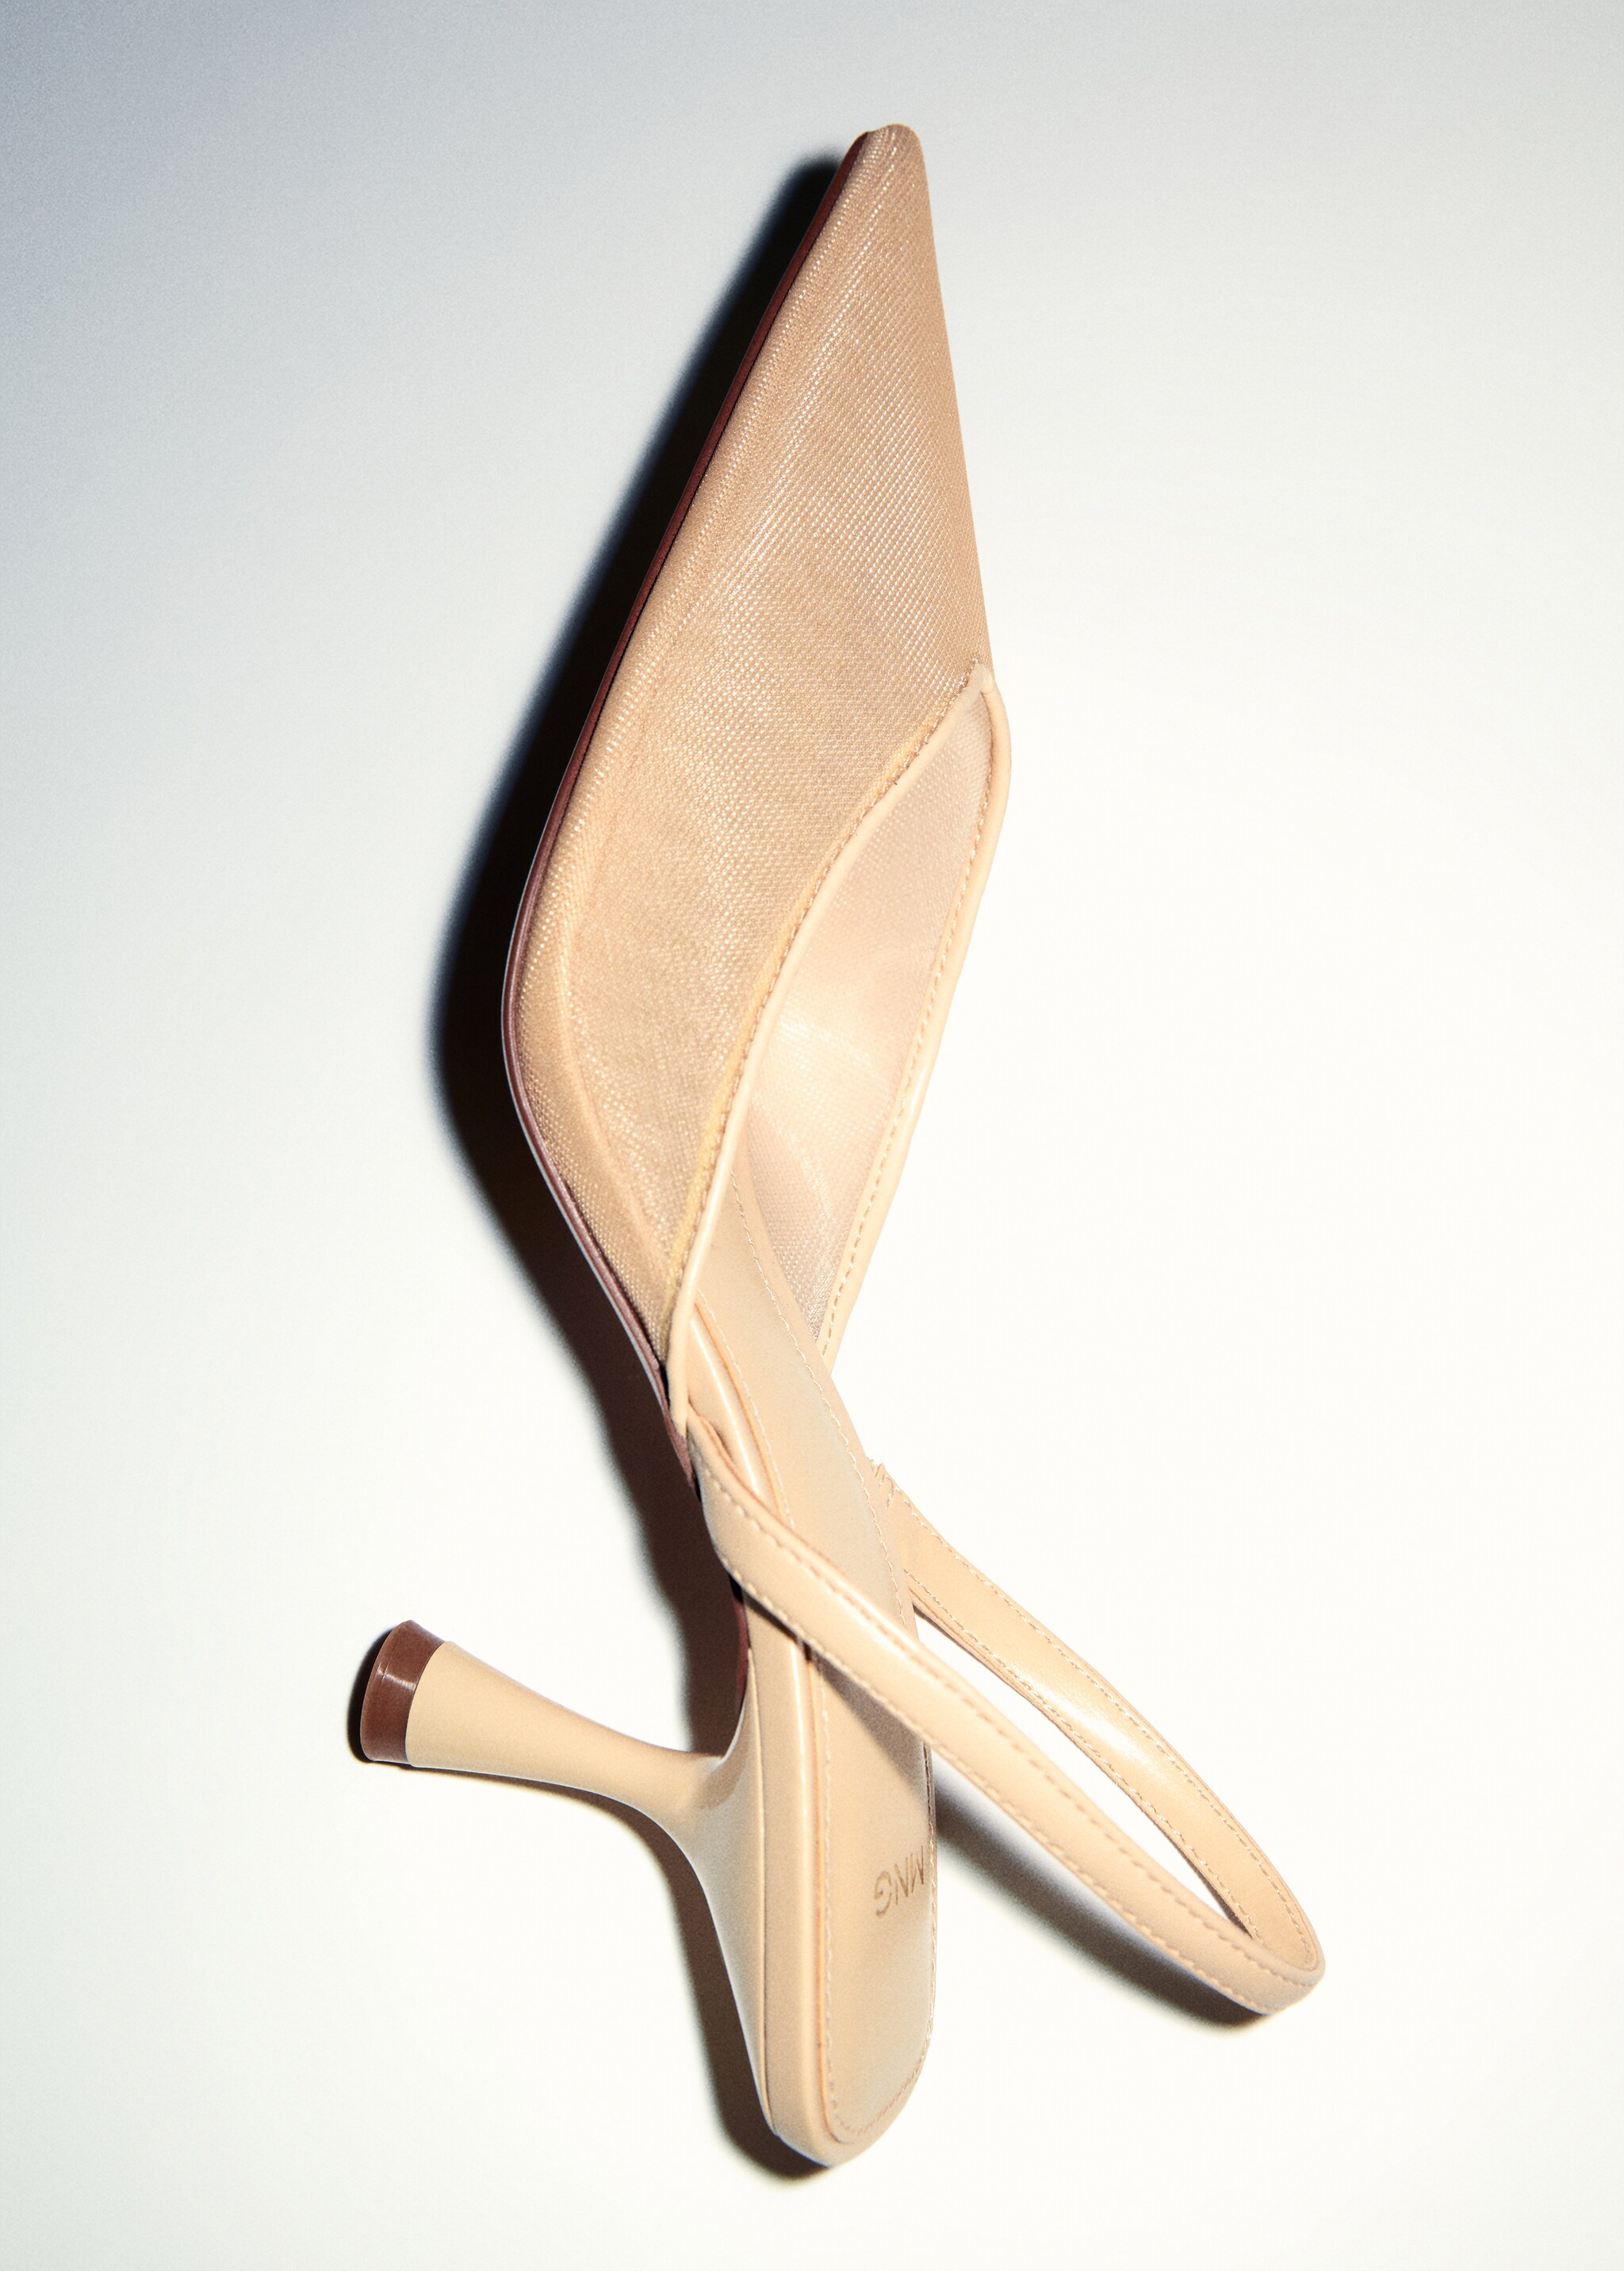 Mesh shoe with heel - Details of the article 5